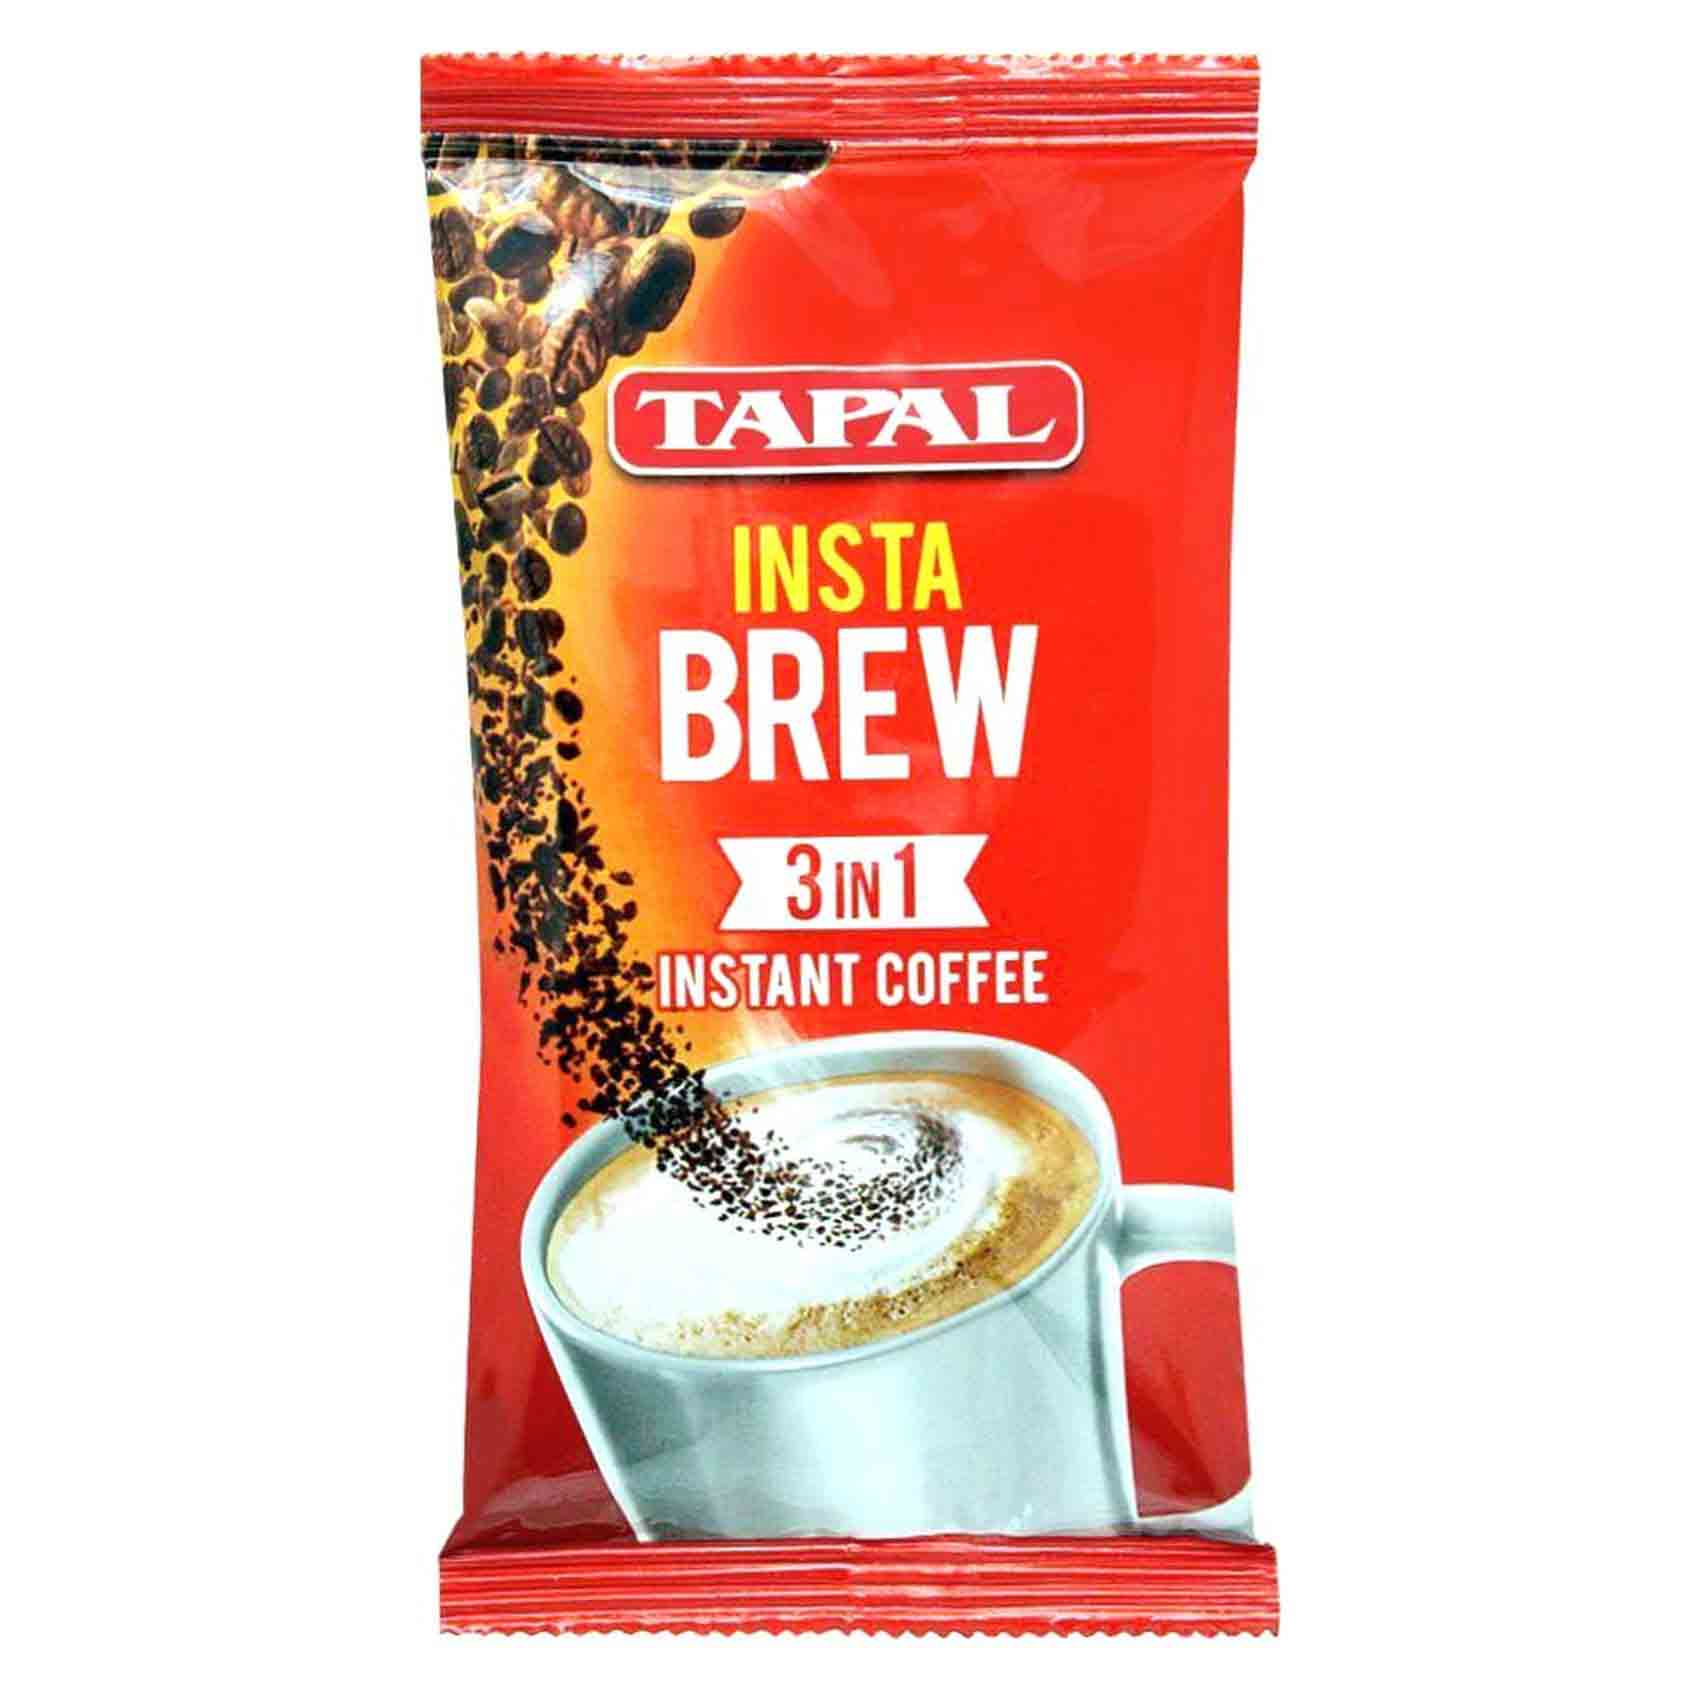 Tapal Insta Brew 3 in 1 Instant Coffee 25 gr